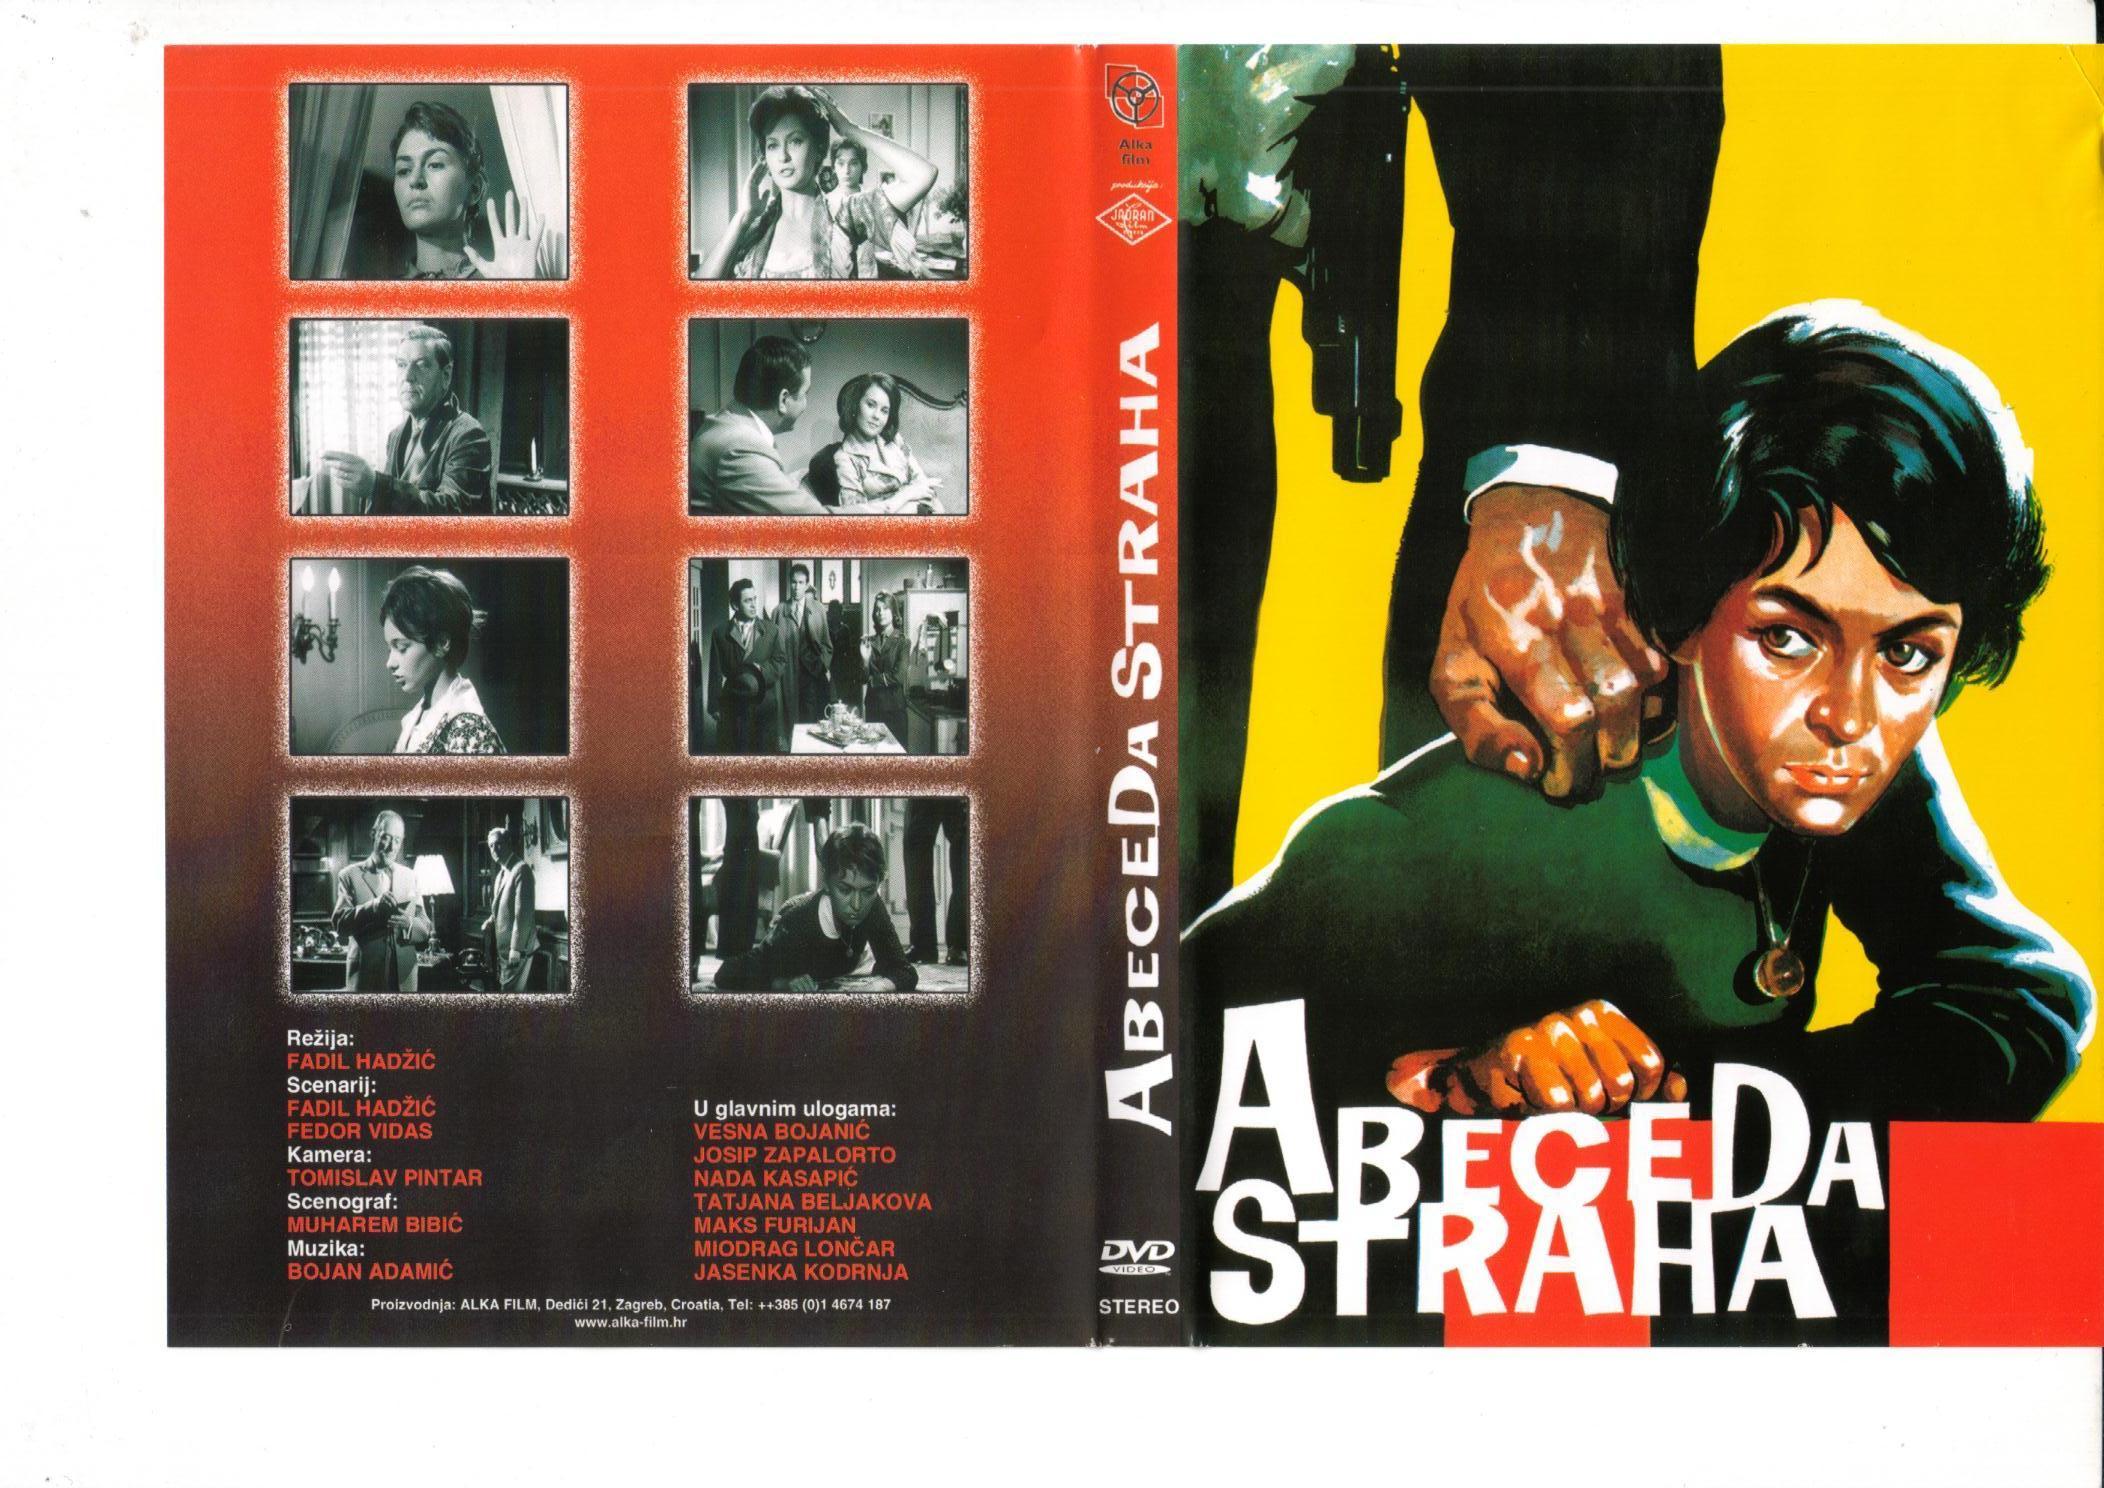 Click to view full size image -  DVD Cover - A - DVD - ABECEDA STRAHA.jpg - DVD - ABECEDA STRAHA.jpg